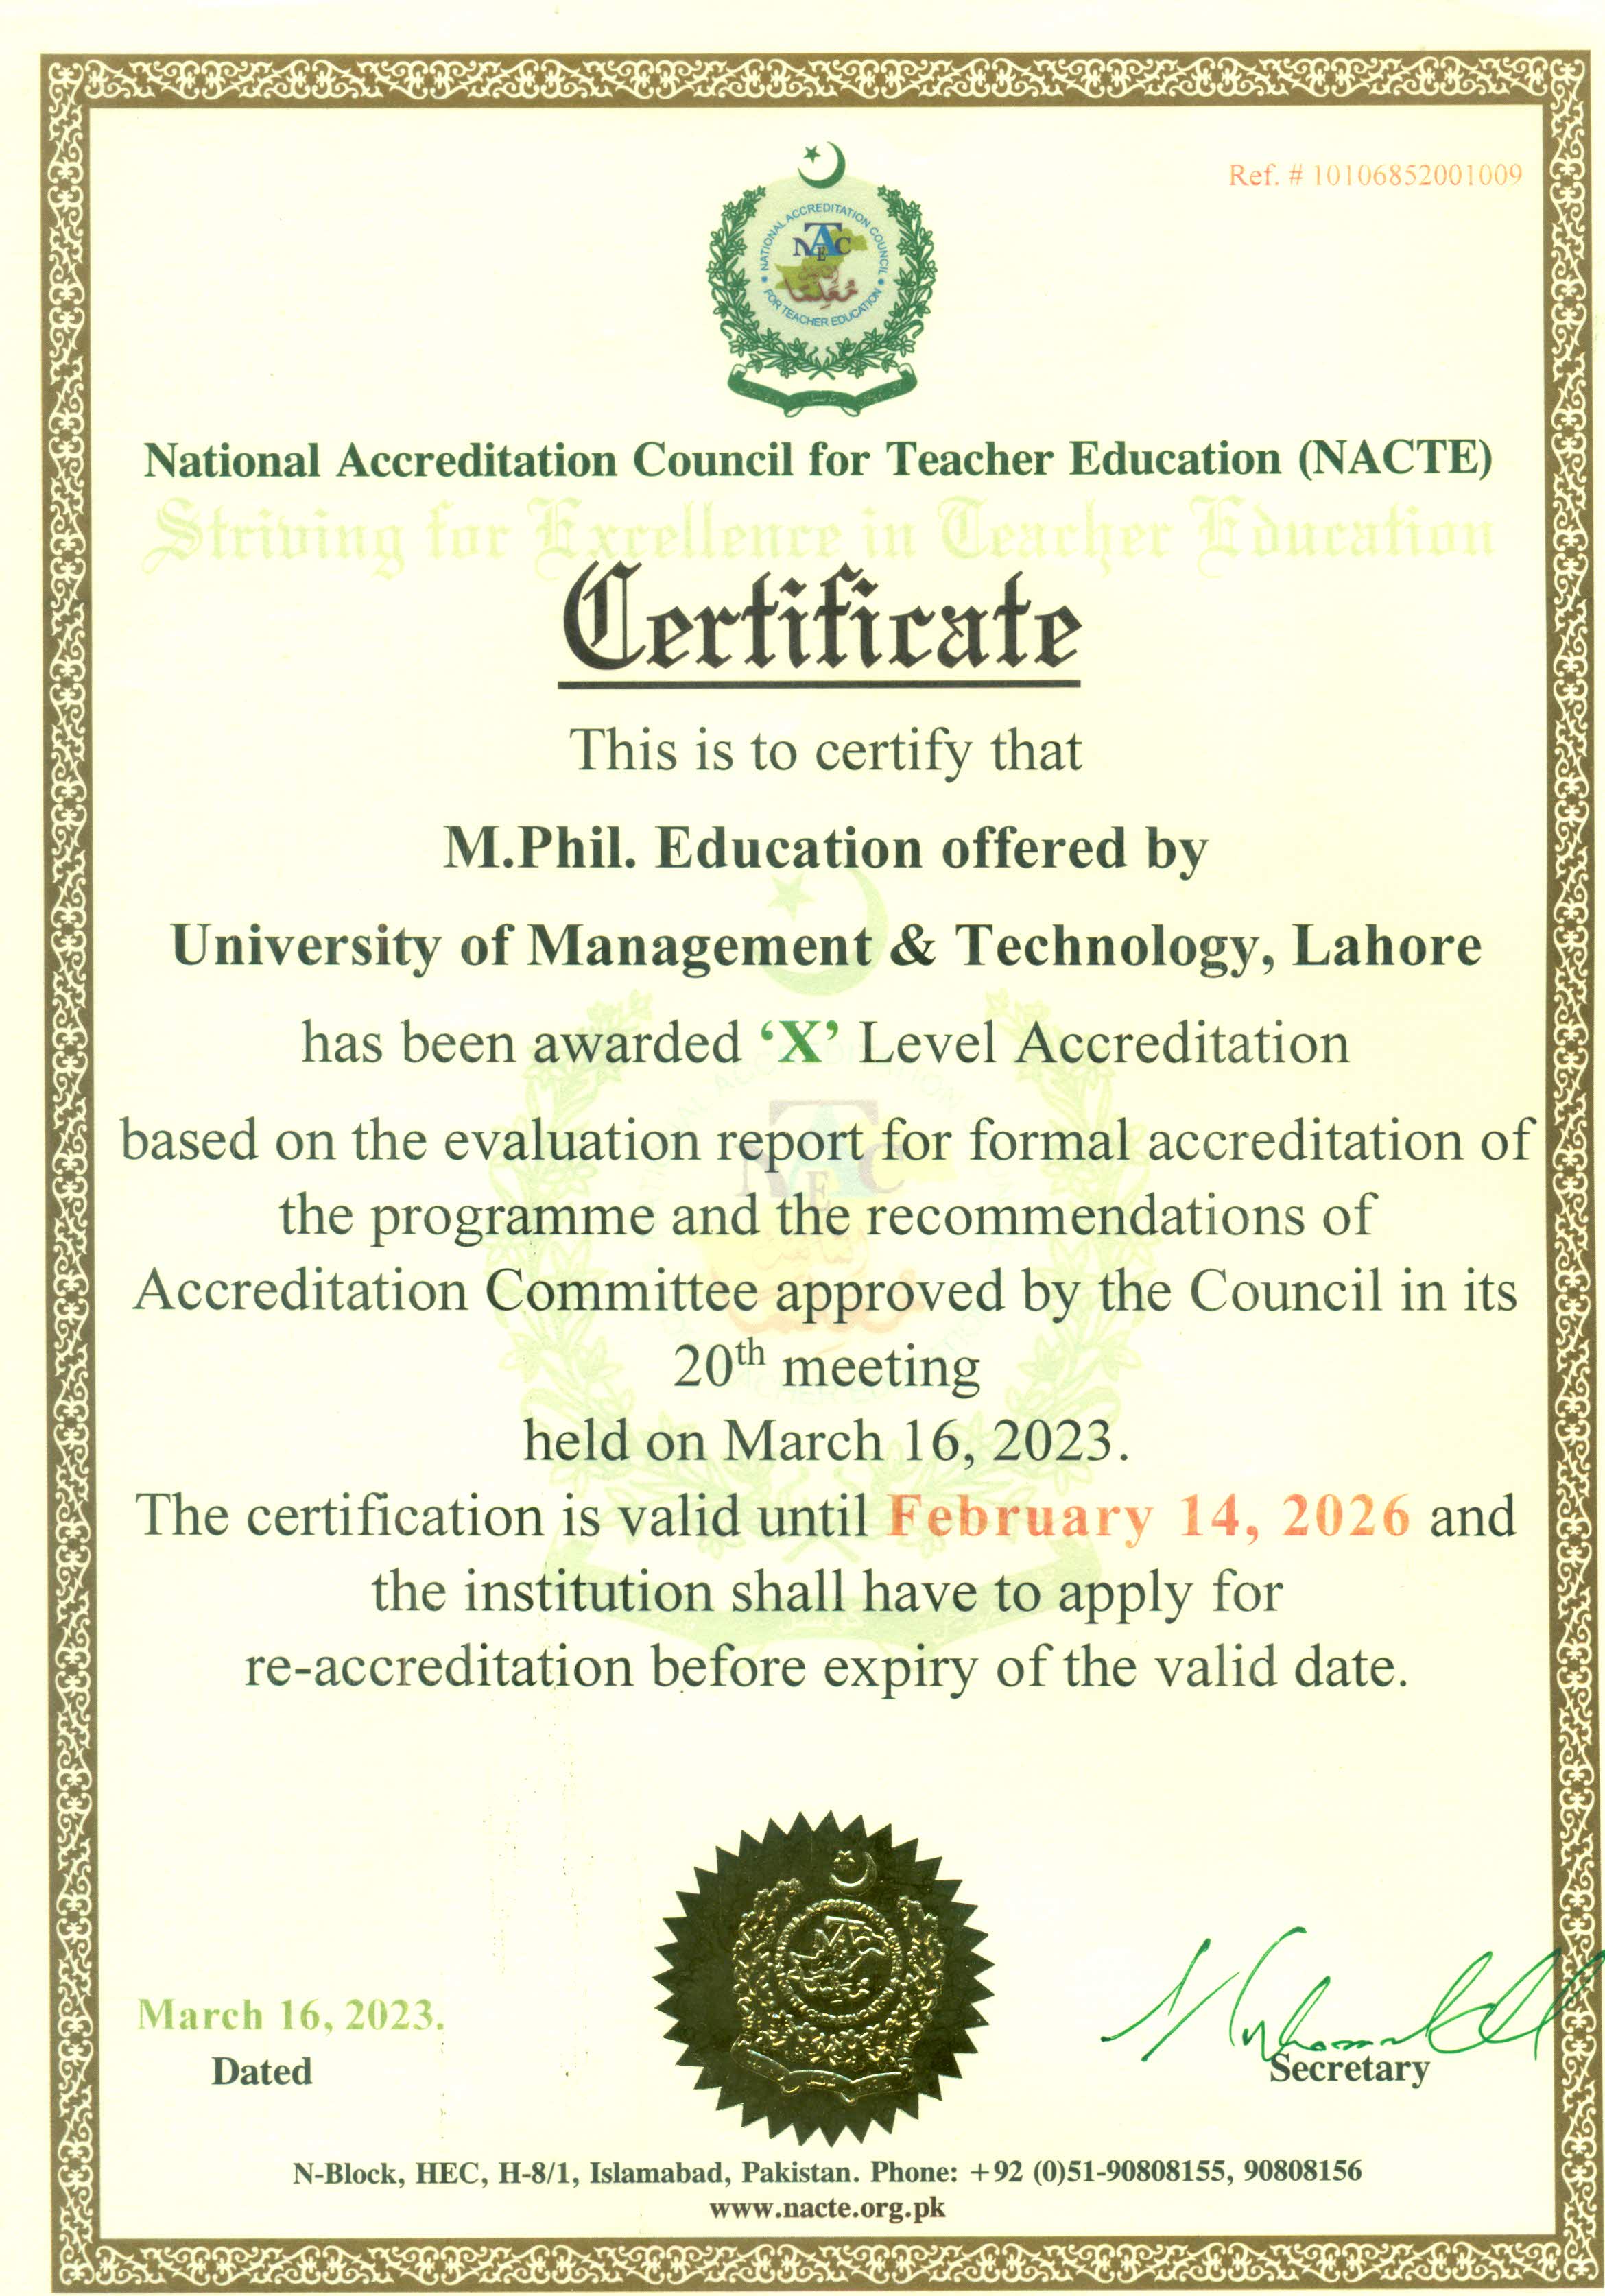 M. Phil Education has been accredited by National Accreditation Council for Teacher Education NACTE in the X category